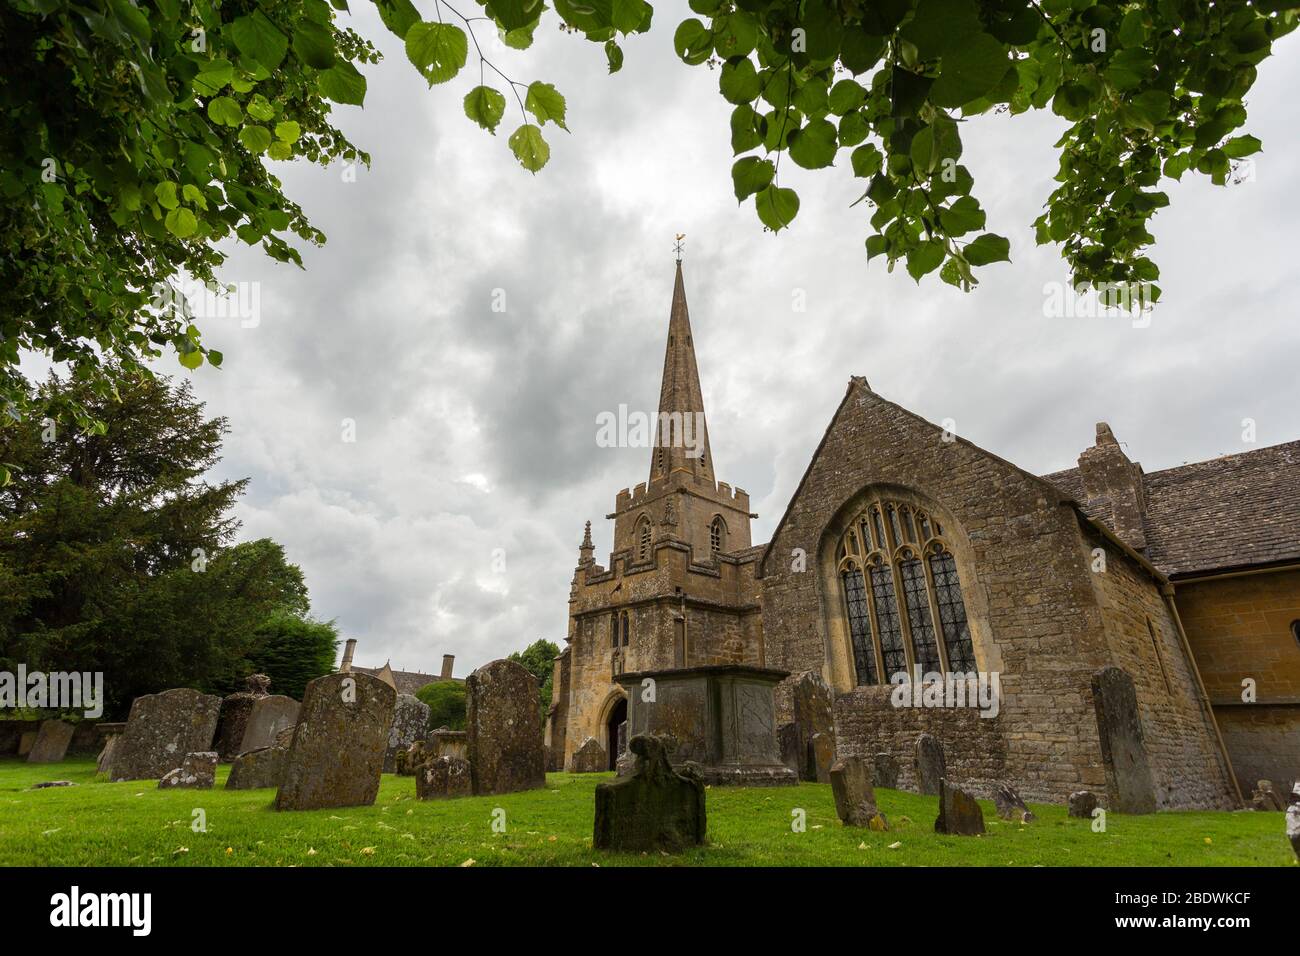 The Church of St Michael and All Angels in the village of Stanton in the Cotswolds, England Stock Photo